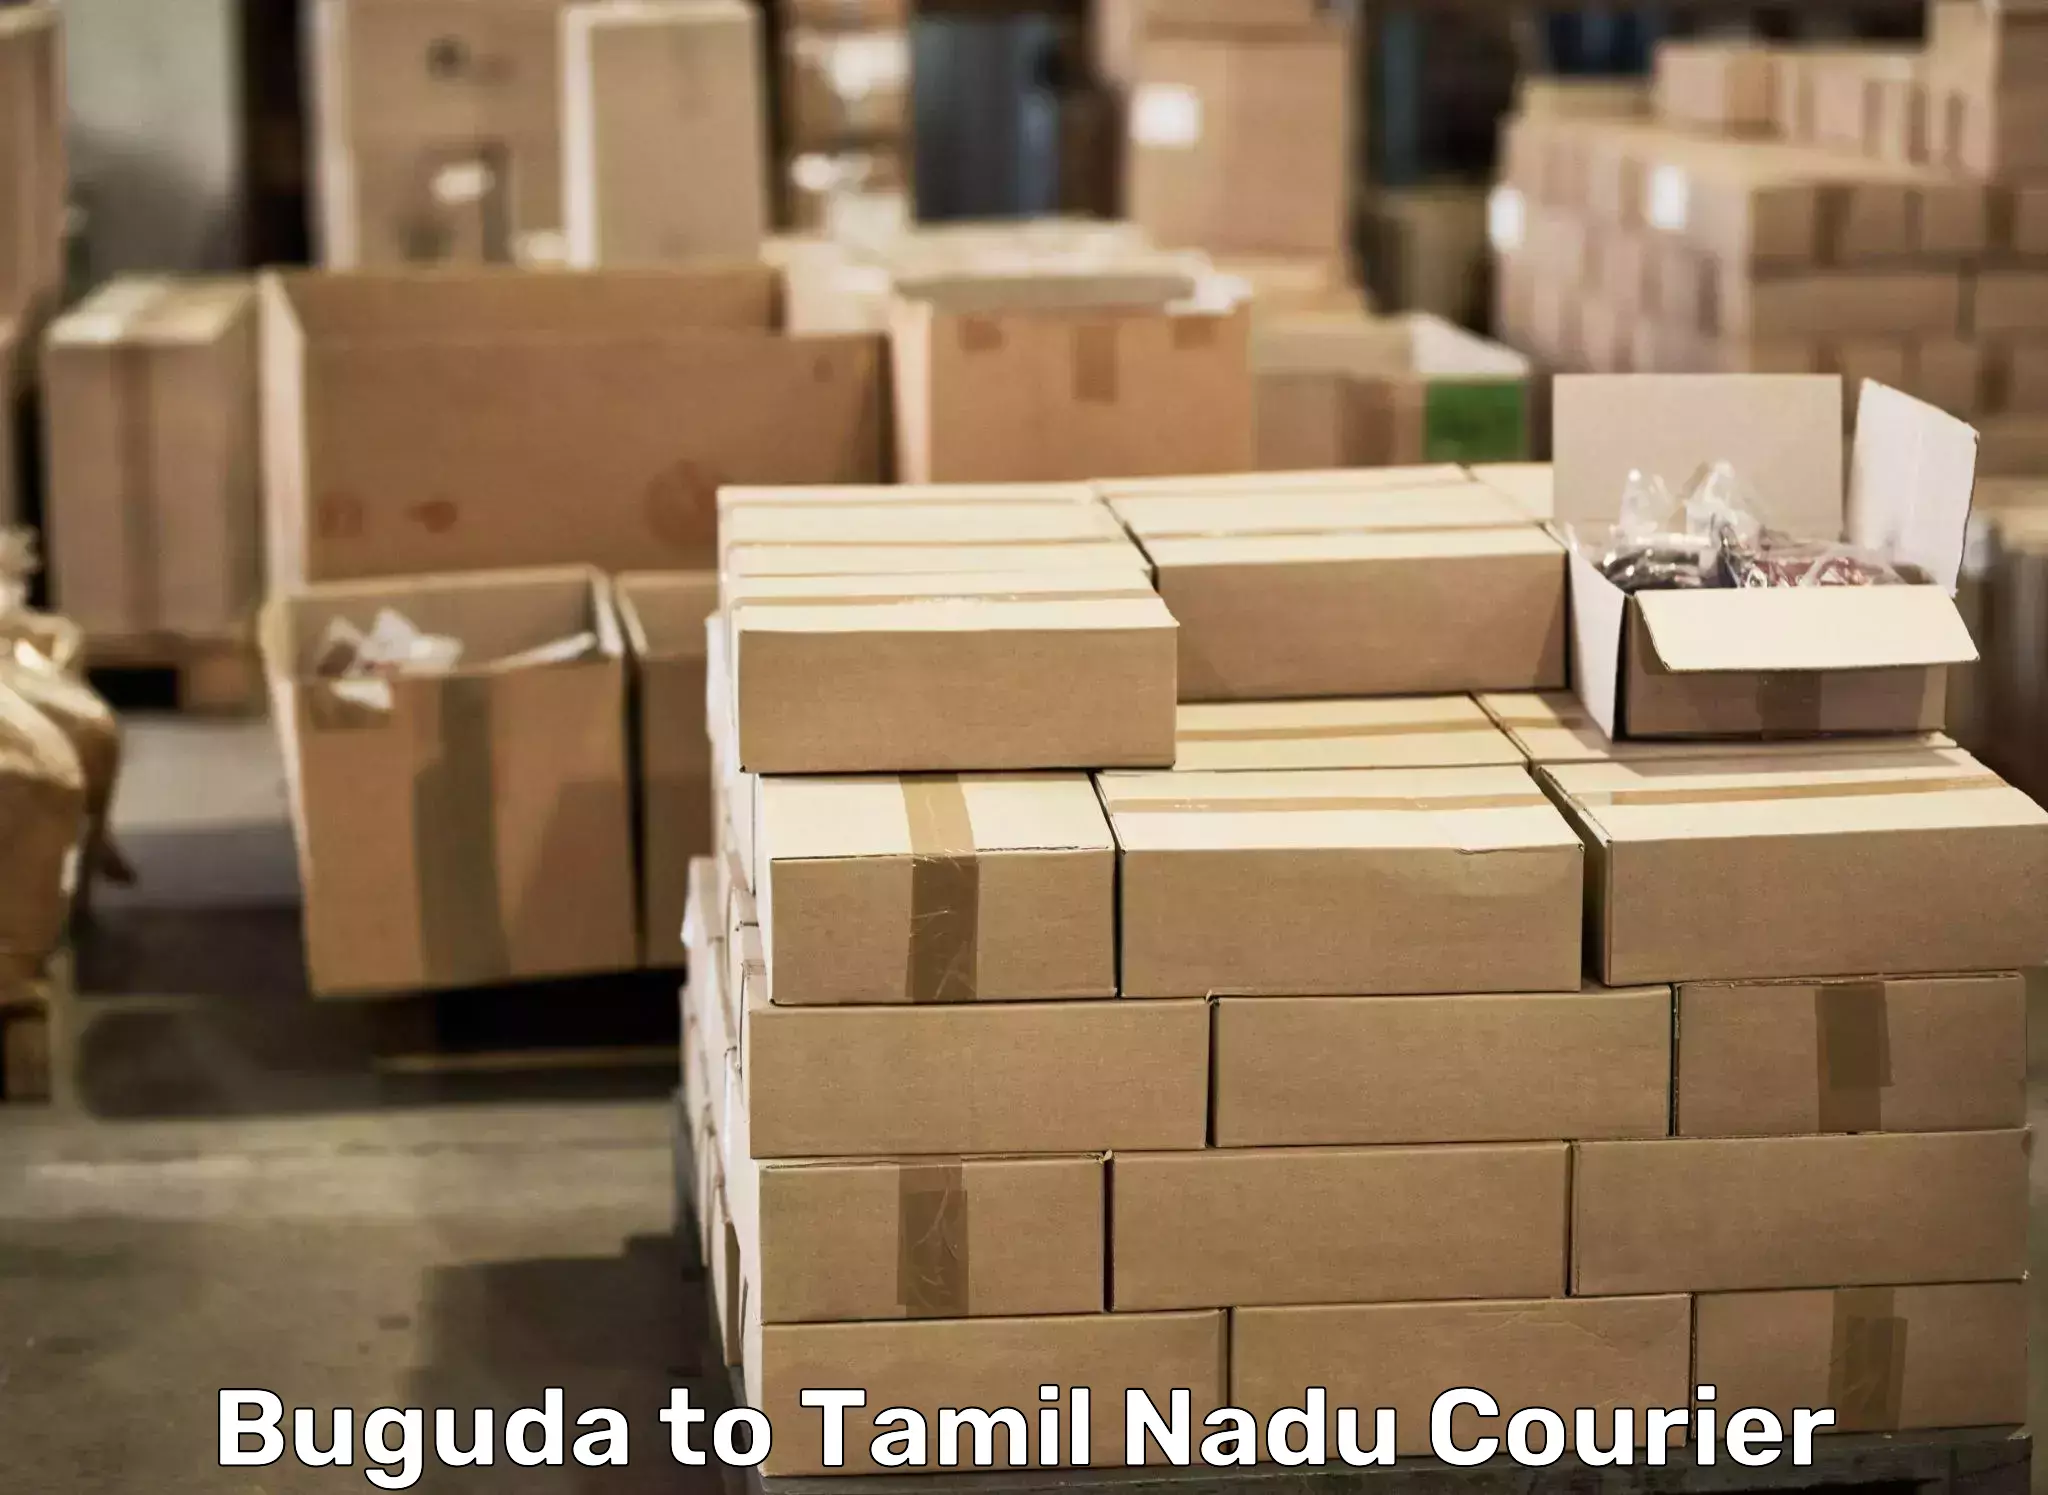 Furniture transport professionals Buguda to Meenakshi Academy of Higher Education and Research Chennai